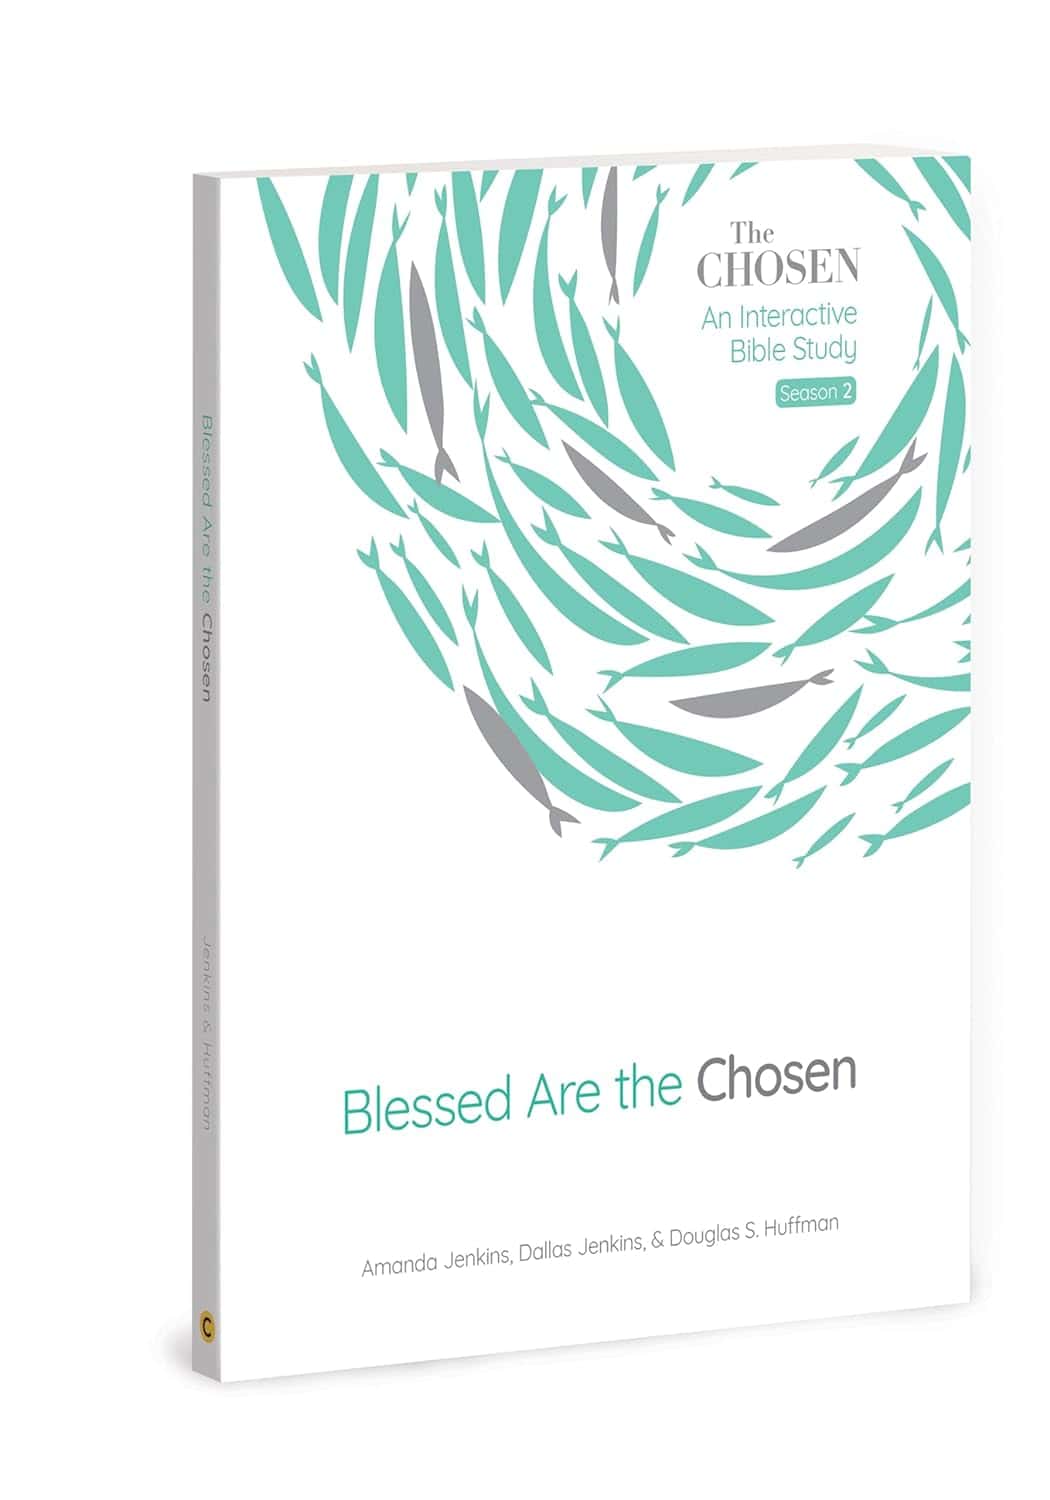 Blessed are the Chosen - An Interactive Bible Study by Amanda Jenkins, Dallas Jenkins and Dr. Douglas S. Huffman